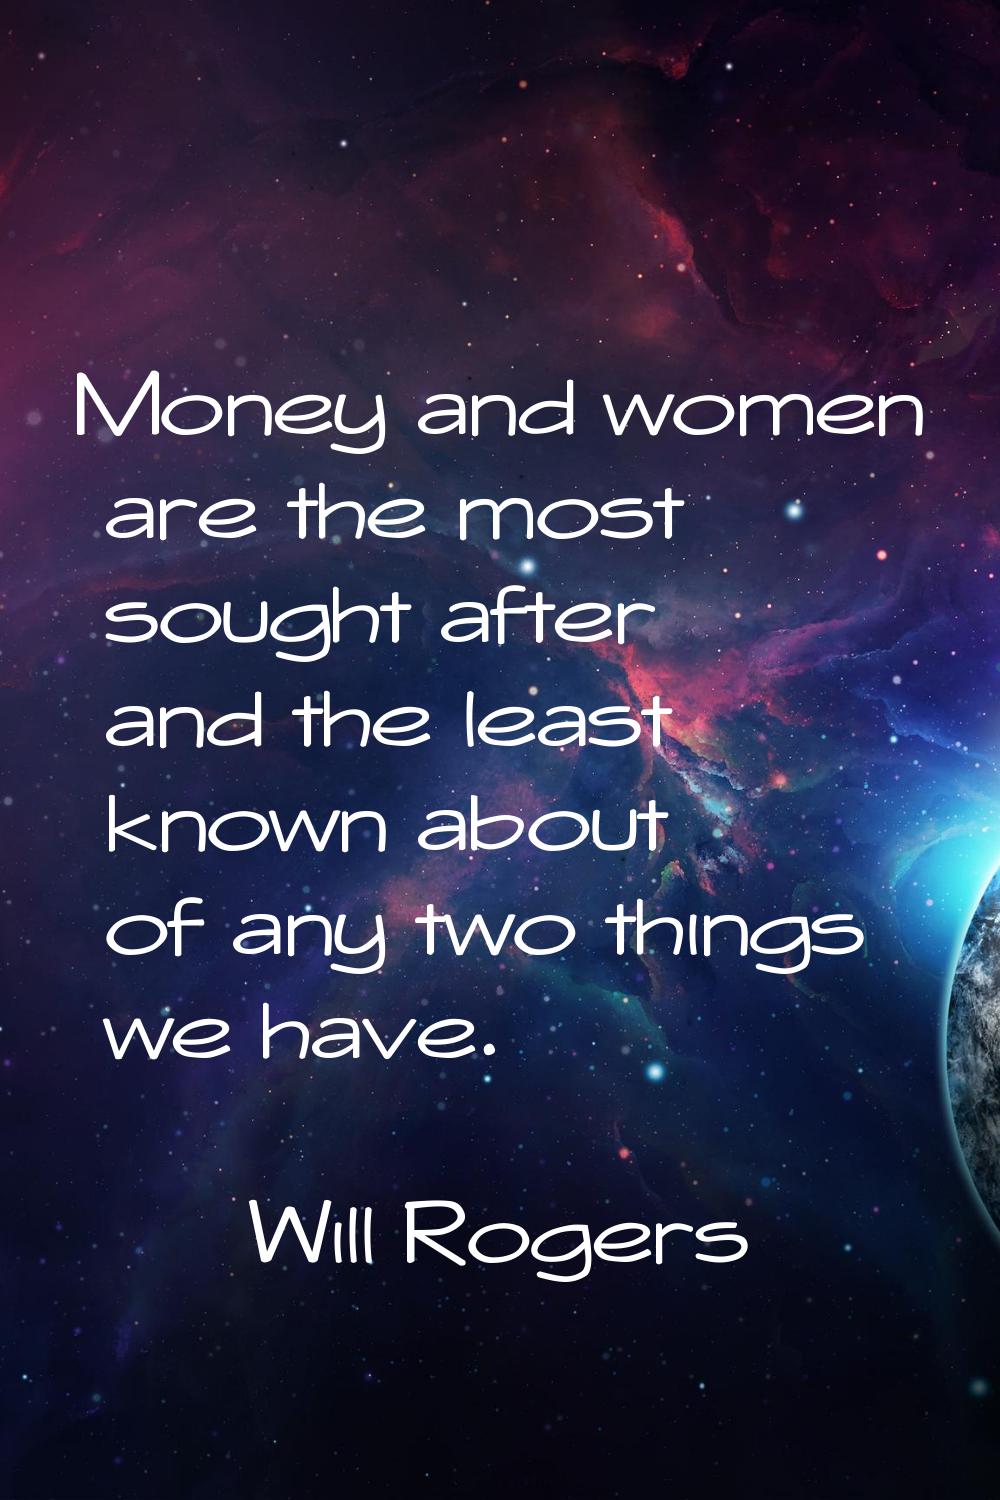 Money and women are the most sought after and the least known about of any two things we have.